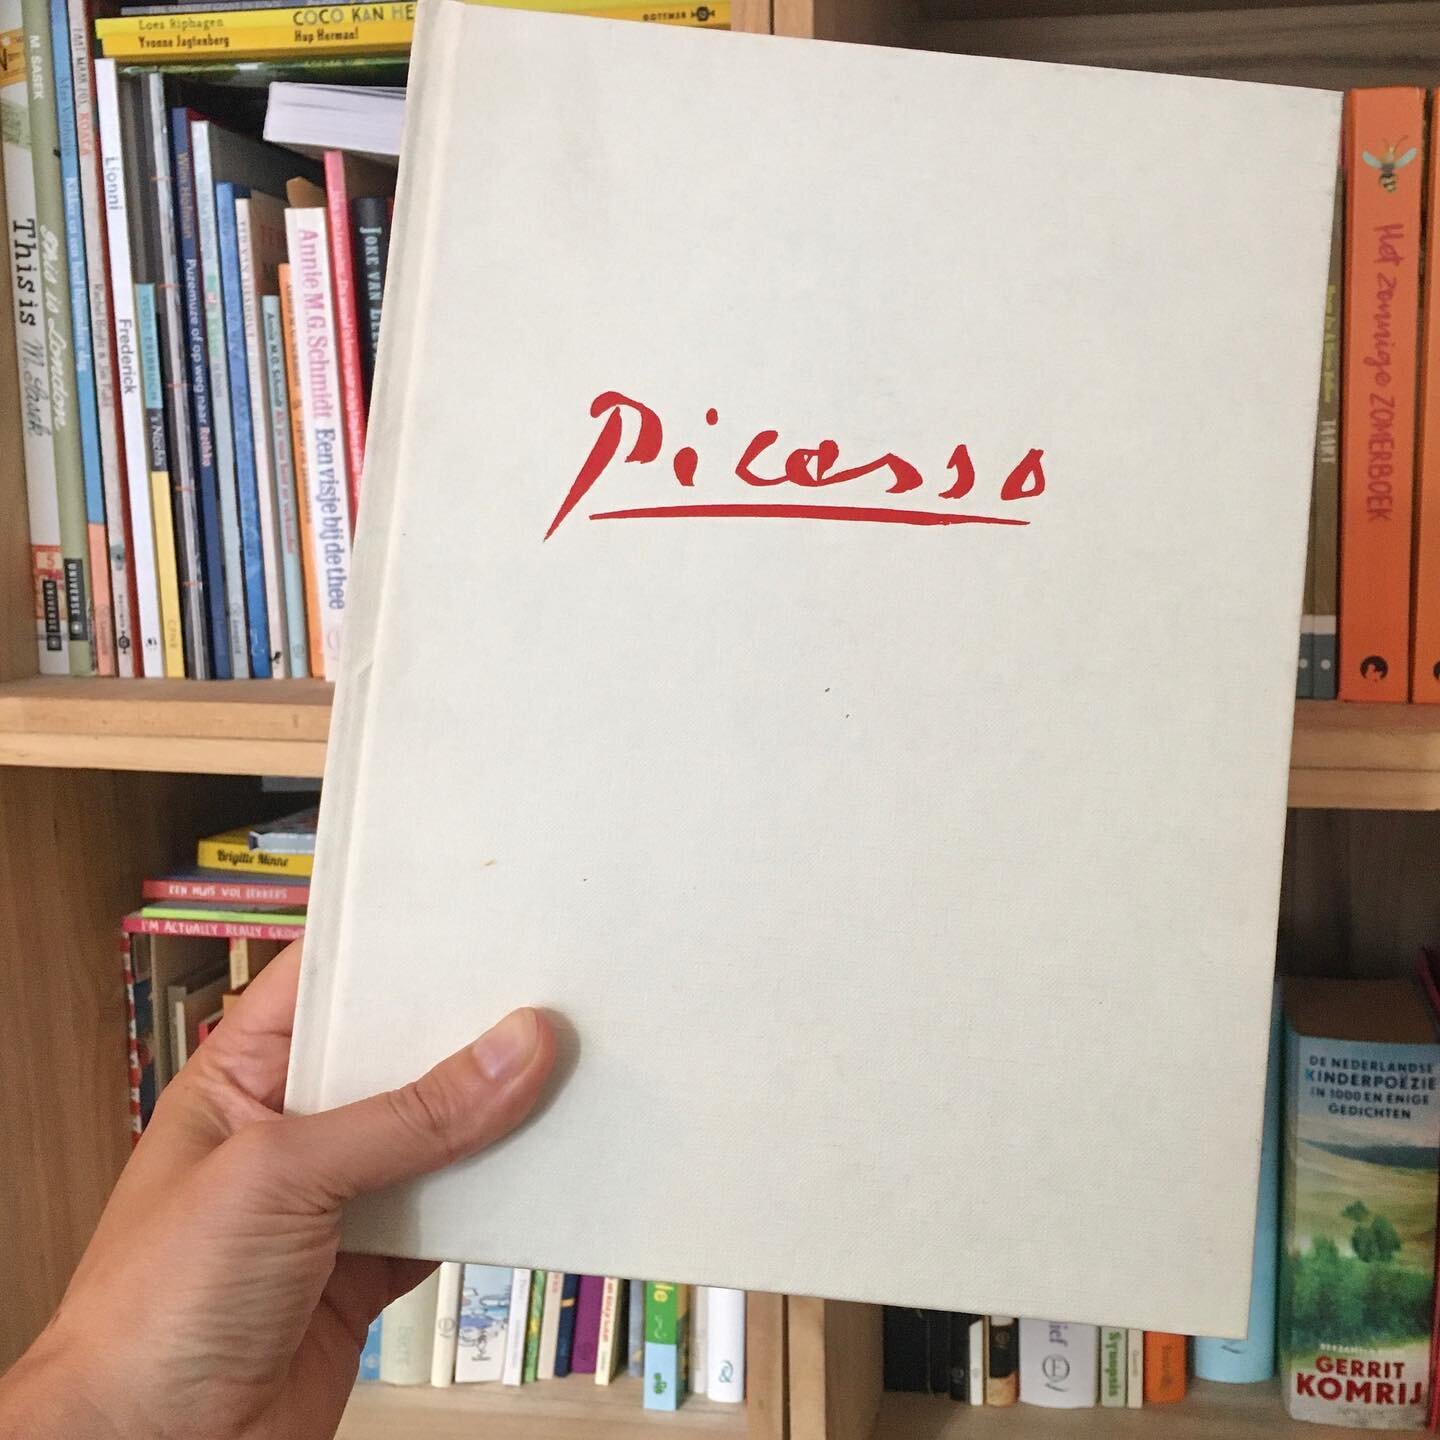 Dorien: Today I&rsquo;d like to share with you this book about work and life of Pablo Picasso. I admire his work, because of the many different disciplines he worked in, his significant contribution to the whole development of modern art in the 20th 